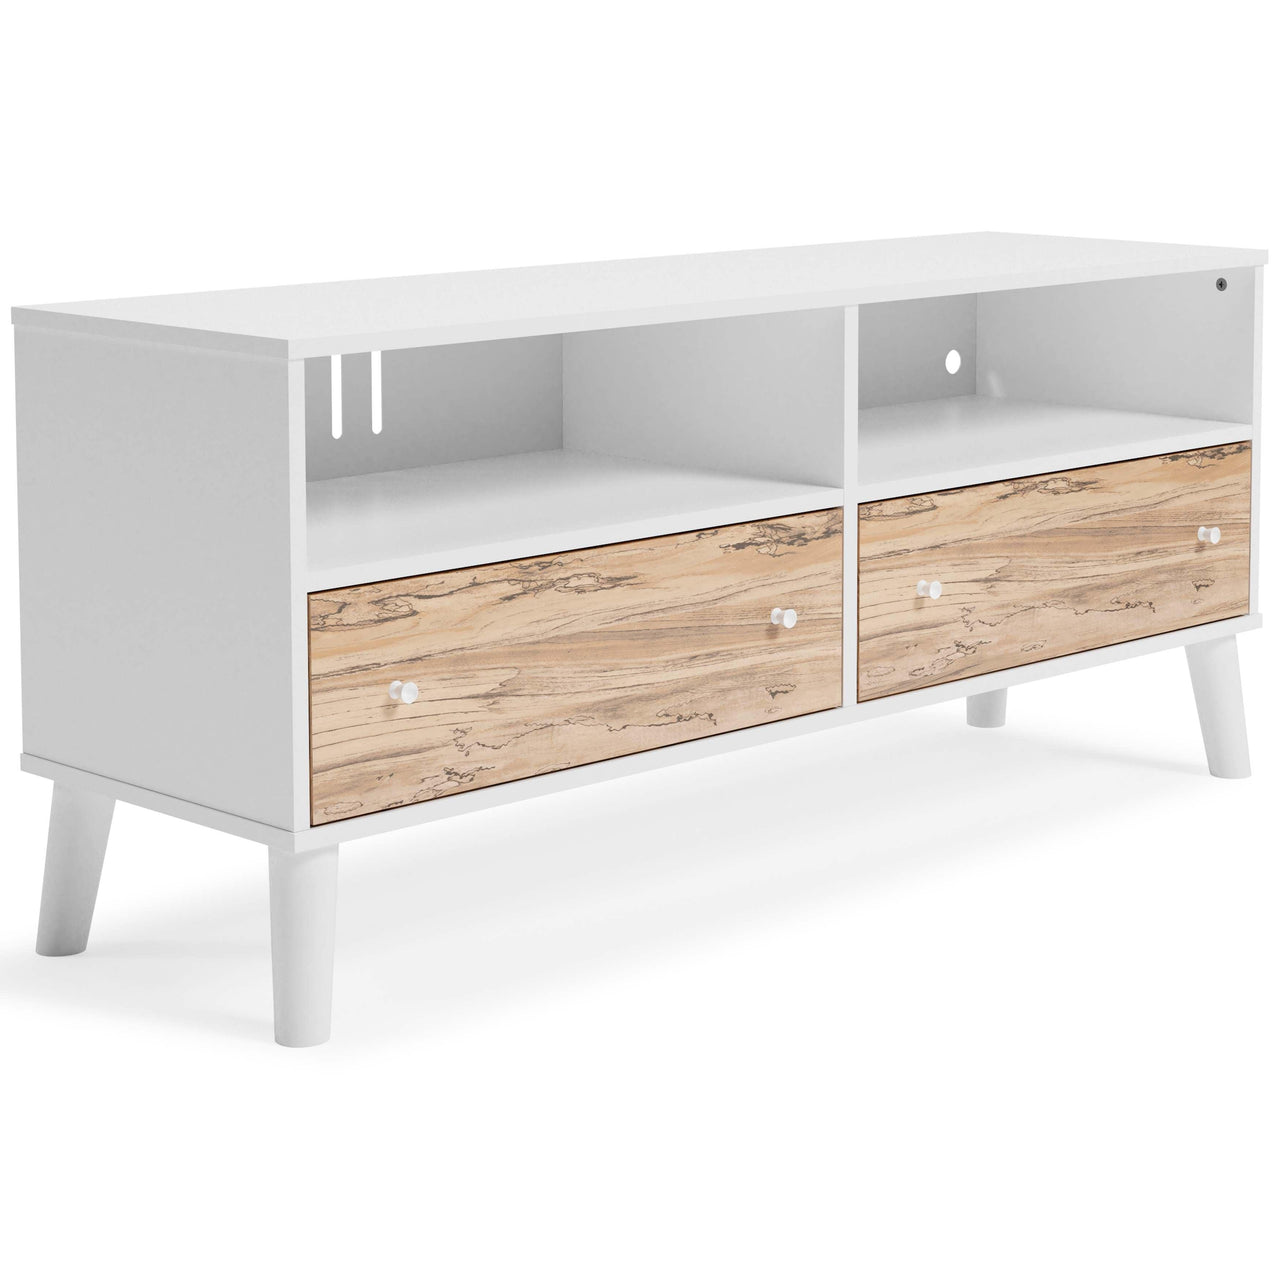 Piperton - White / Brown - Medium TV Stand Tony's Home Furnishings Furniture. Beds. Dressers. Sofas.